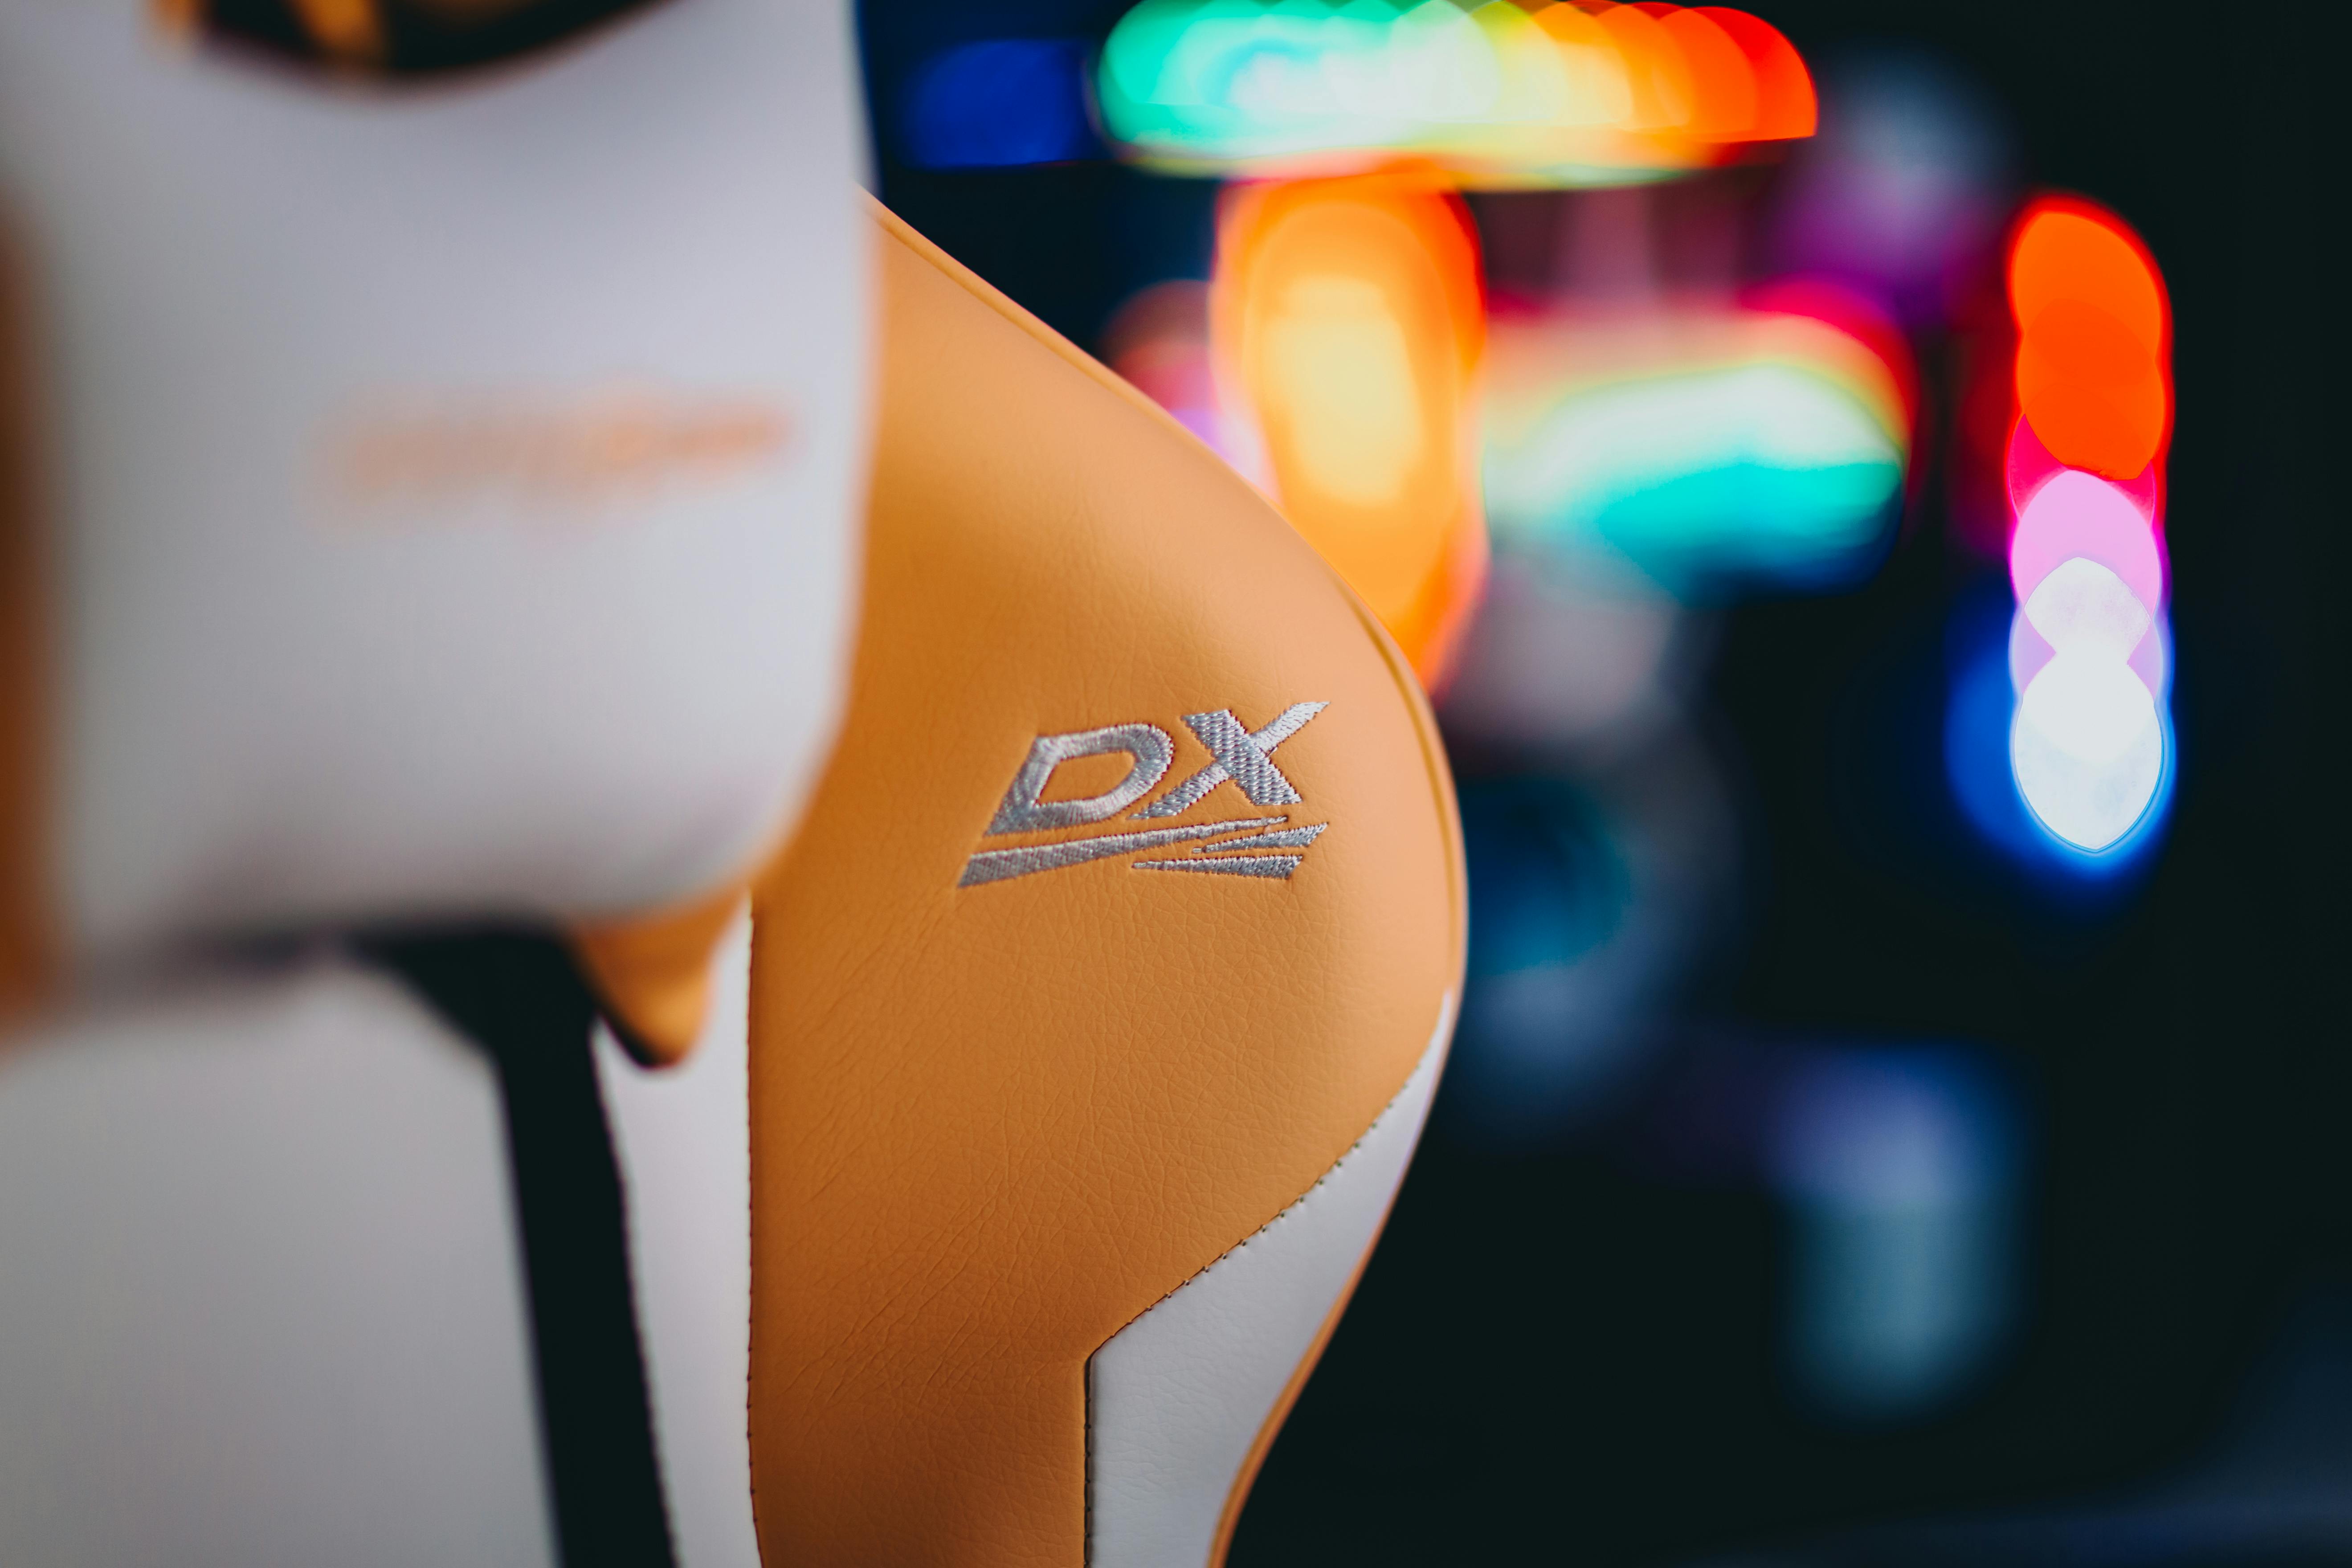 Part of a gaming chair | Source: Pexels